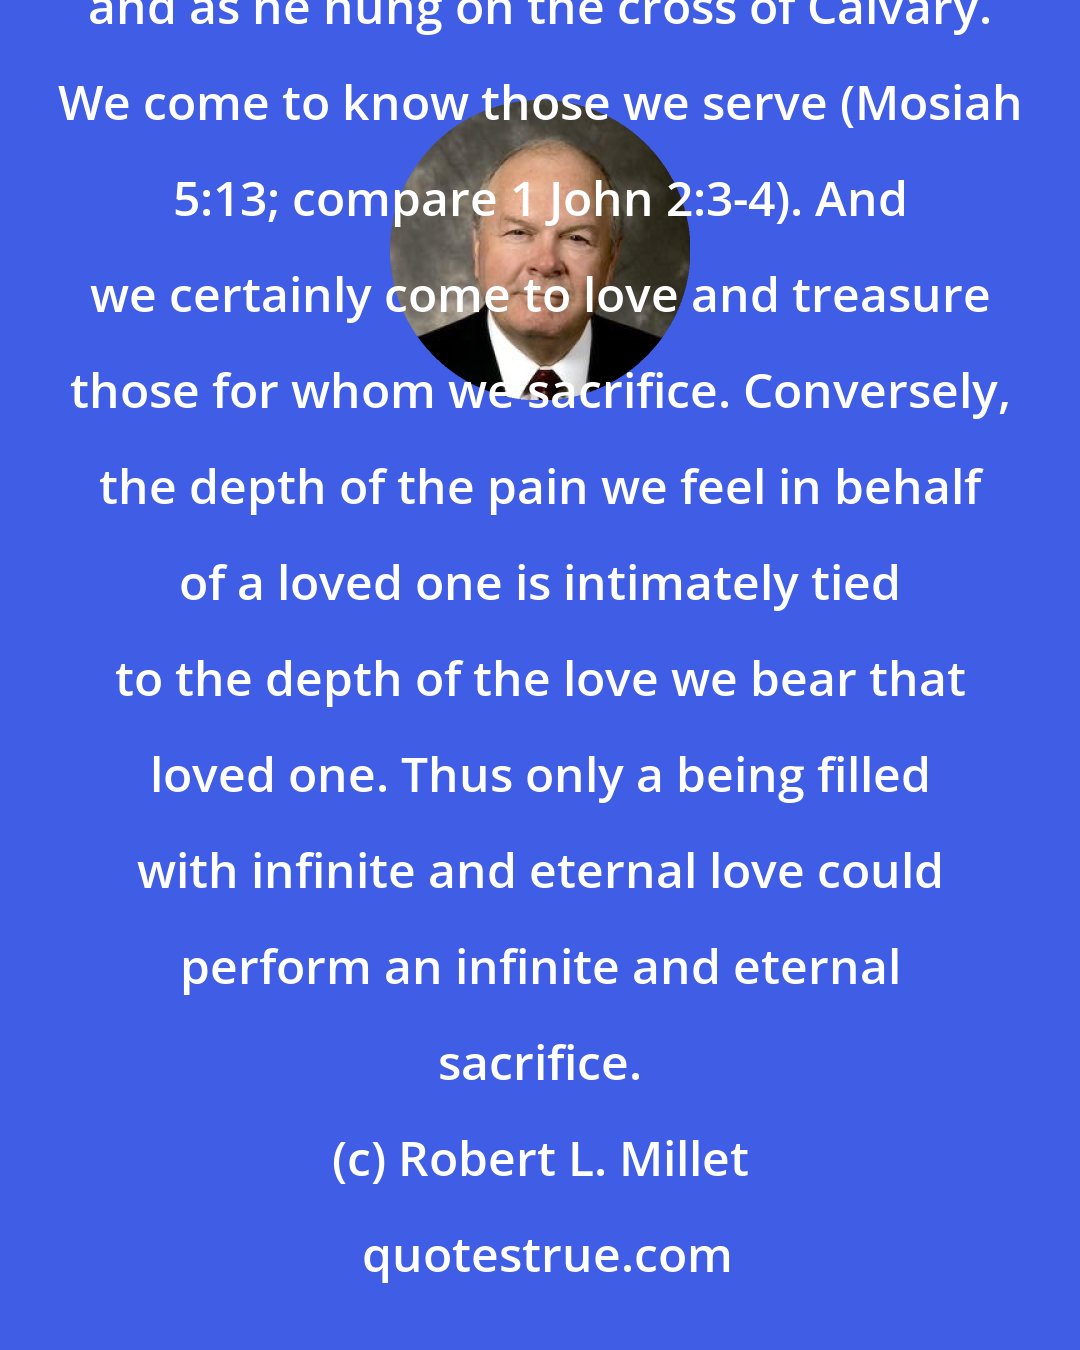 Robert L. Millet: He who had known us before we were even born came to know us infinitely better as he knelt in Gethsemane and as he hung on the cross of Calvary. We come to know those we serve (Mosiah 5:13; compare 1 John 2:3-4). And we certainly come to love and treasure those for whom we sacrifice. Conversely, the depth of the pain we feel in behalf of a loved one is intimately tied to the depth of the love we bear that loved one. Thus only a being filled with infinite and eternal love could perform an infinite and eternal sacrifice.